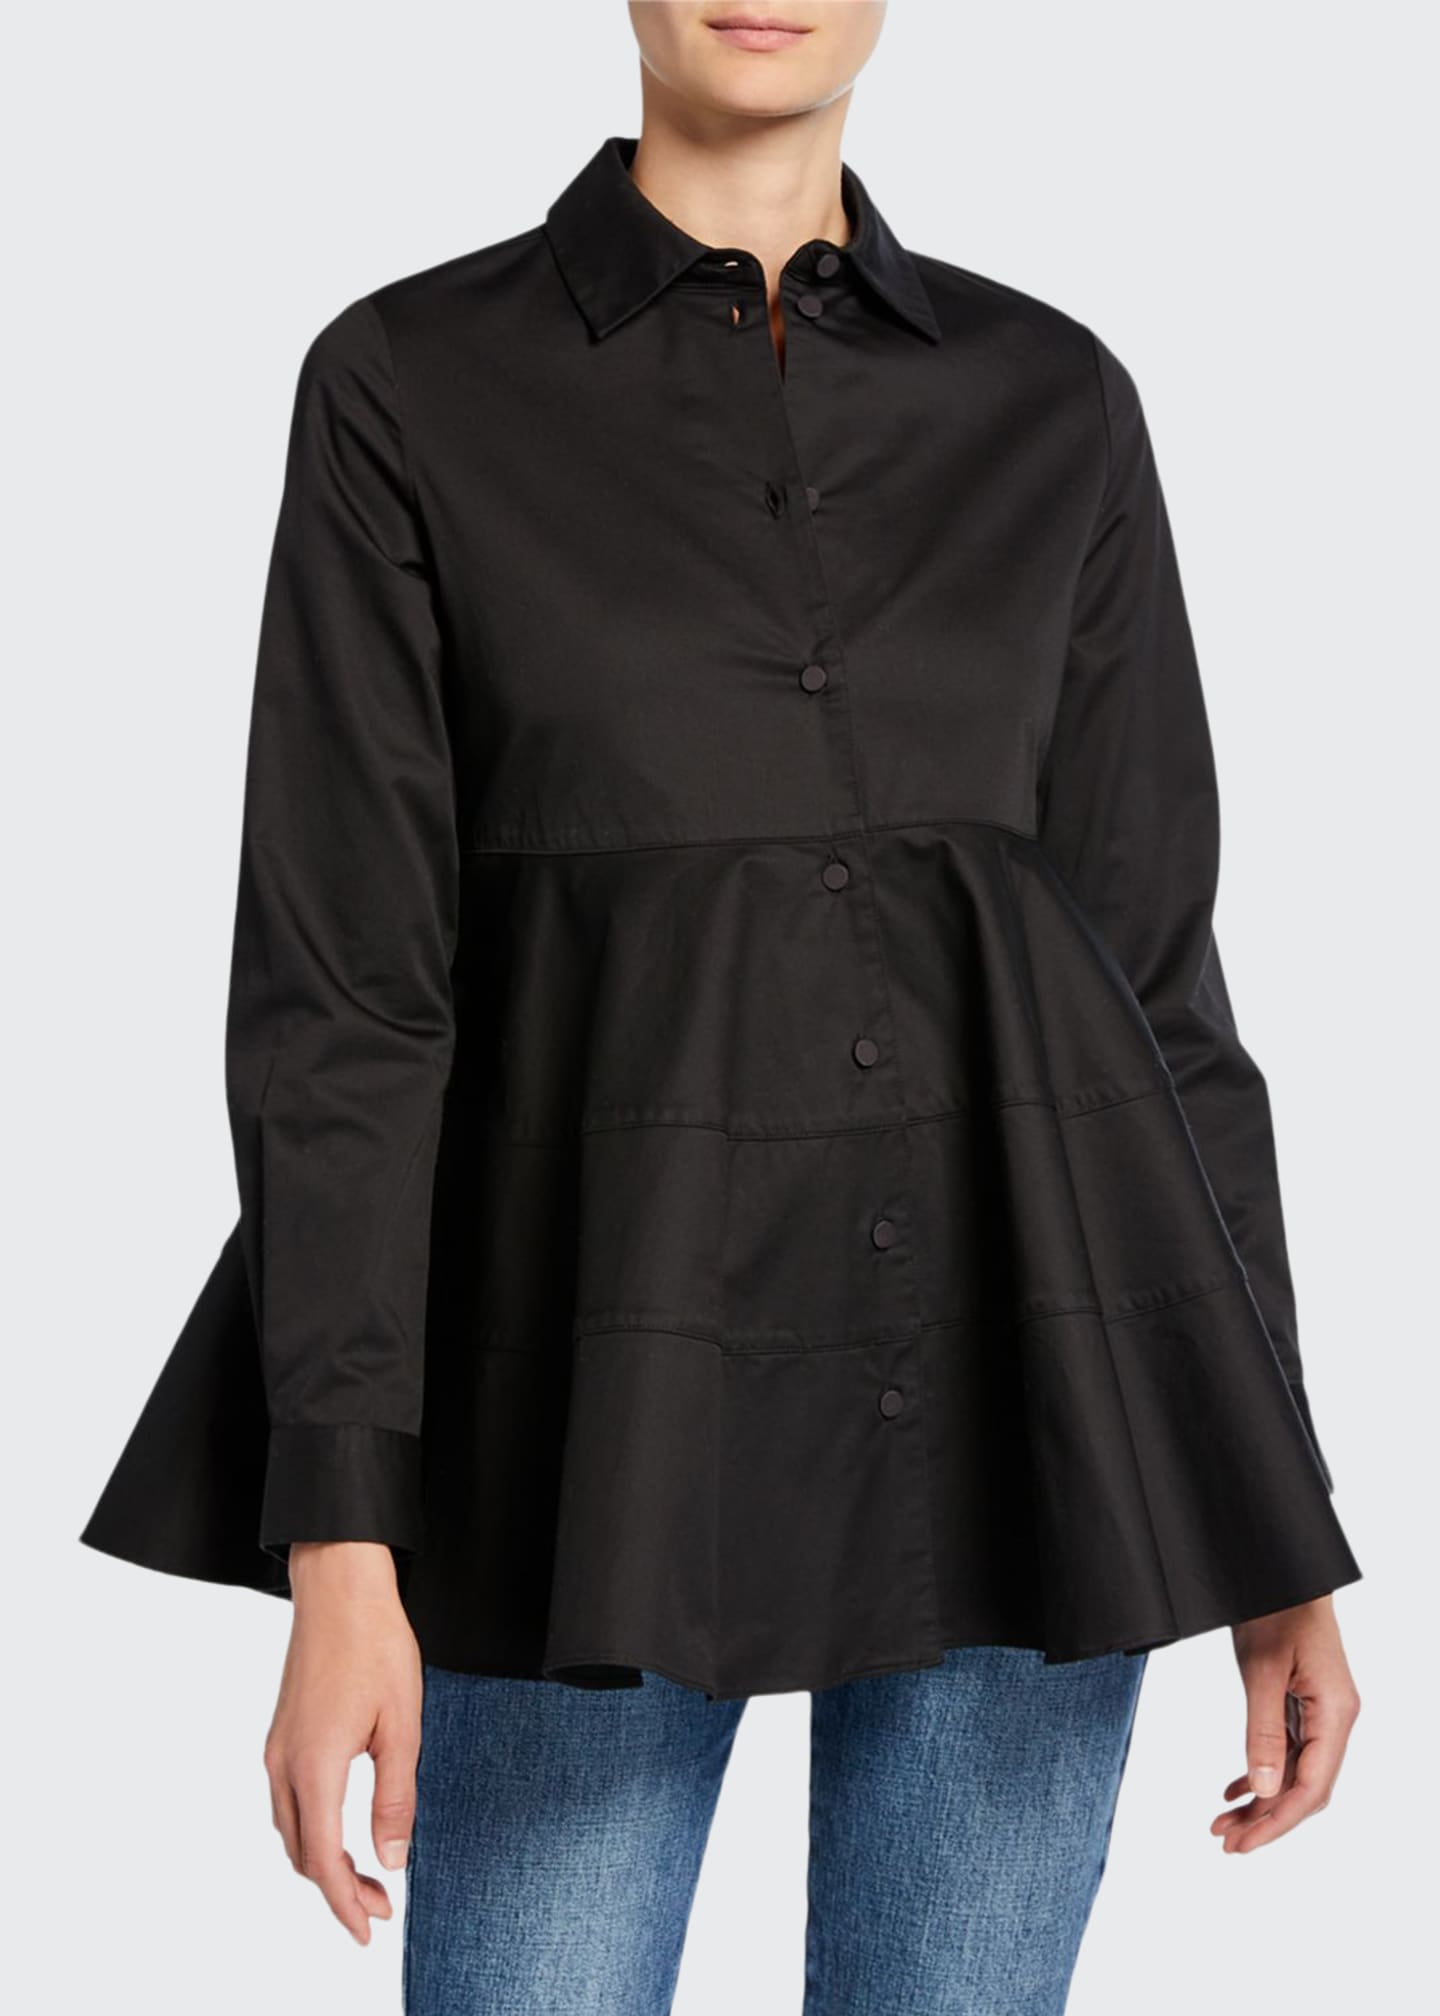 Co Tiered Button-Front Blouse - Bergdorf Goodman